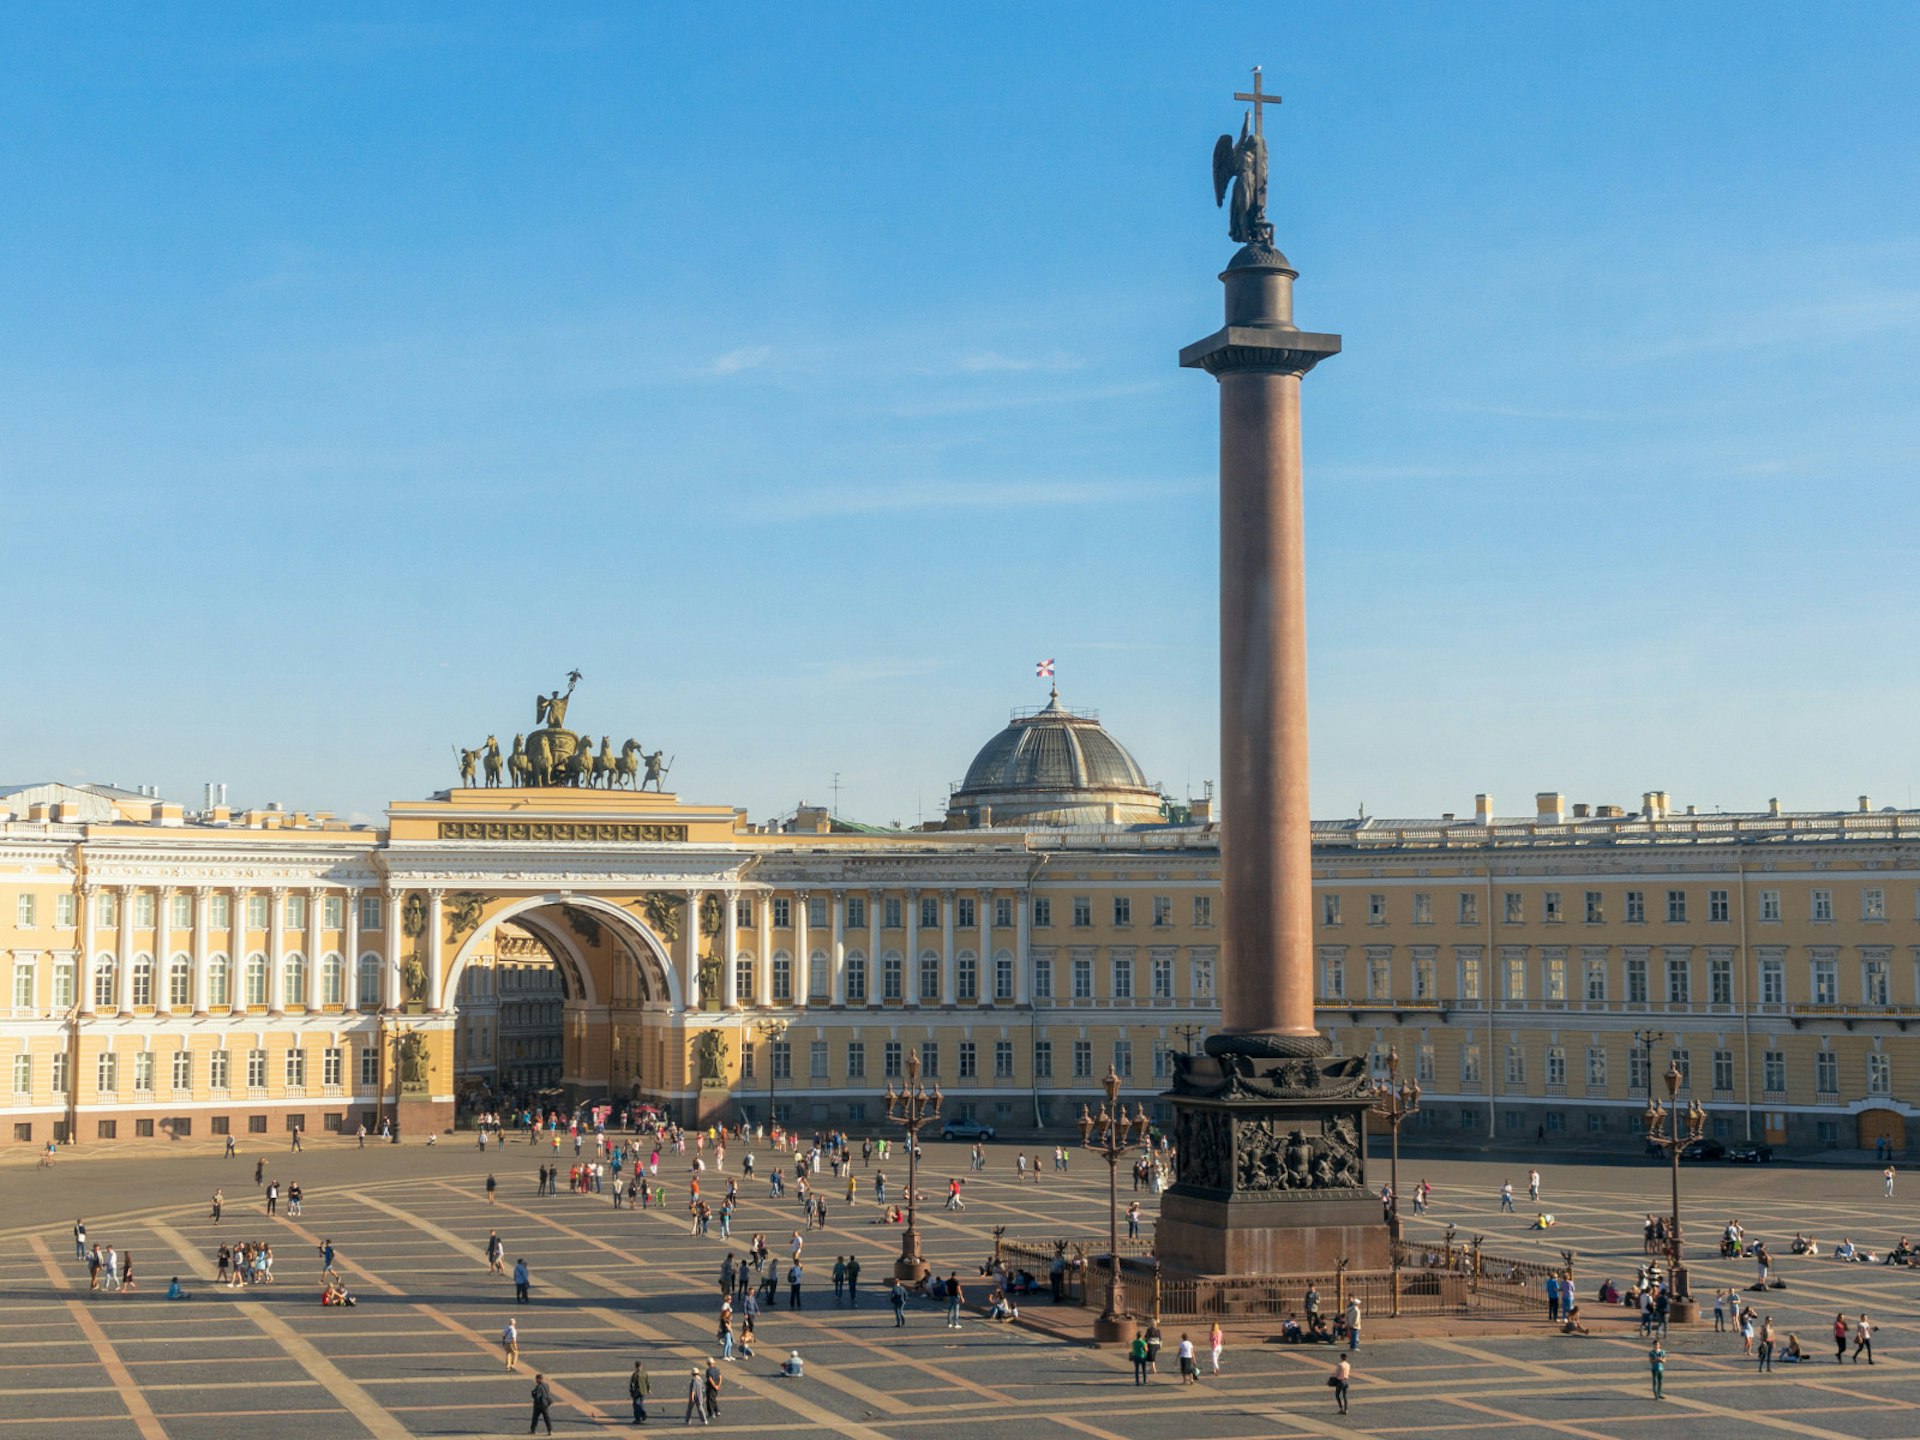 The monumental Palace Square, starting point for free walking tours © Pelikh Alexey / Shutterstock